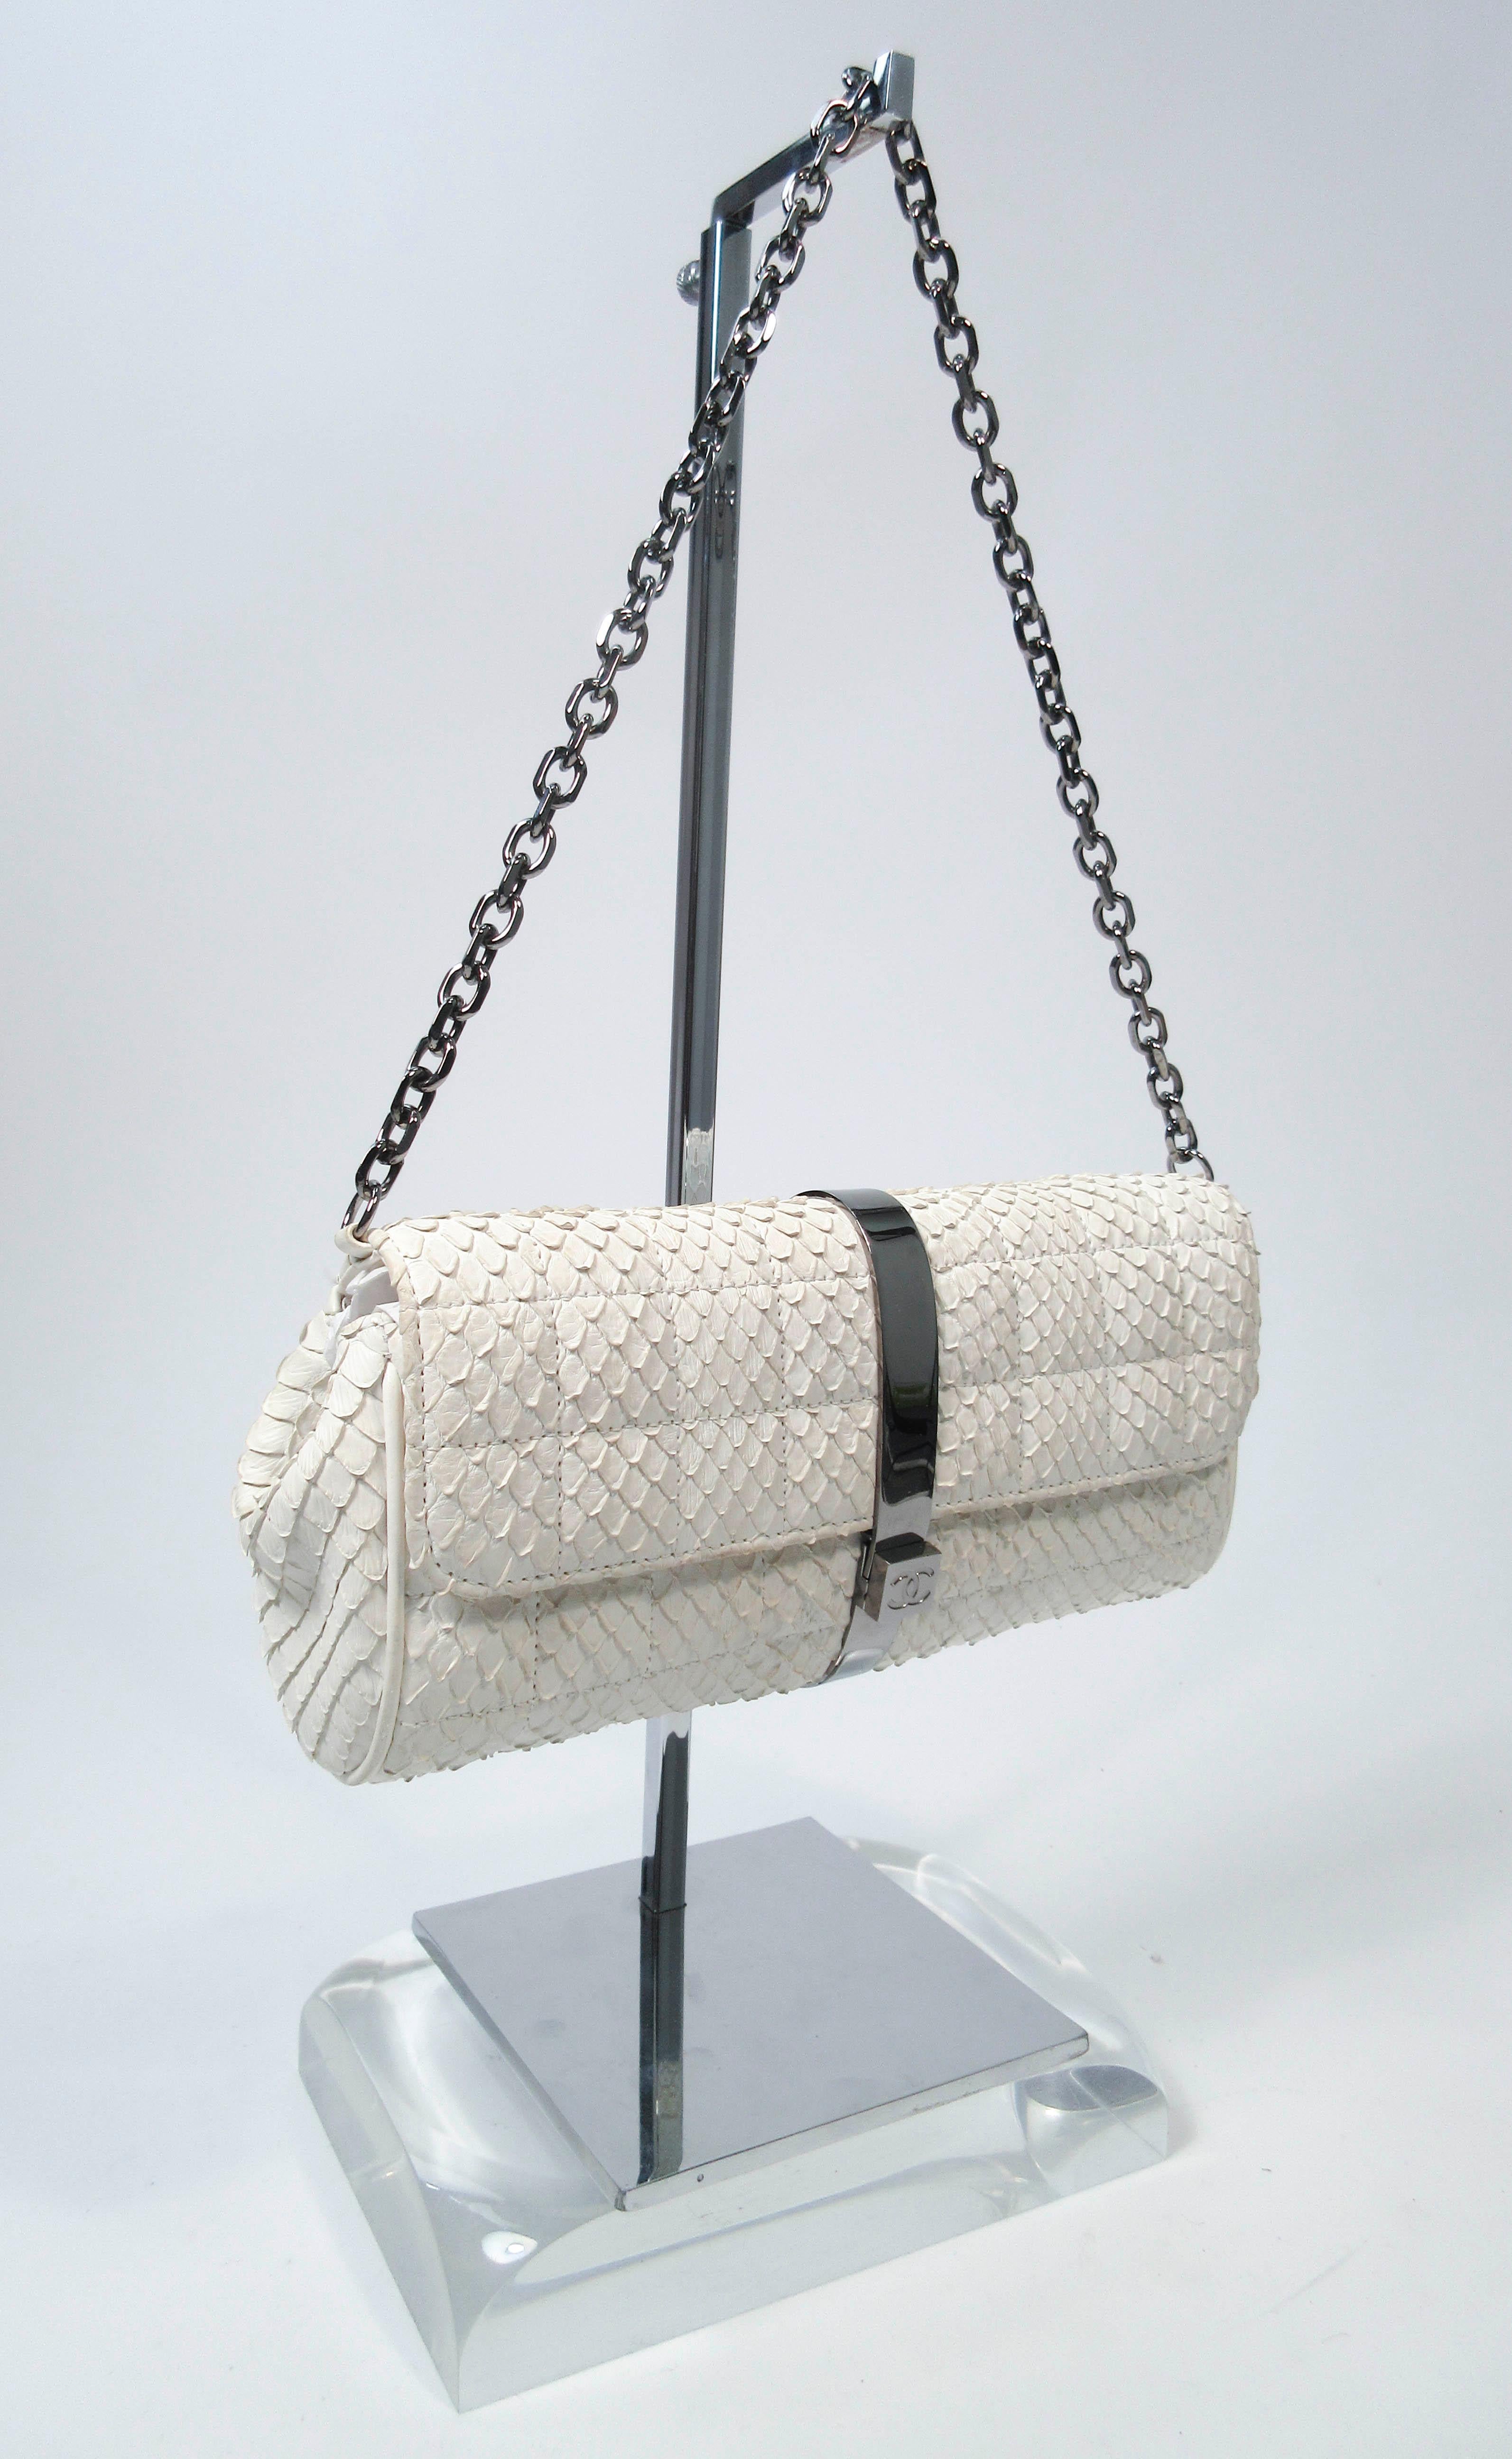 Women's Chanel White Snakeskin Small Chain Clutch Purse with Silvertone Hardware